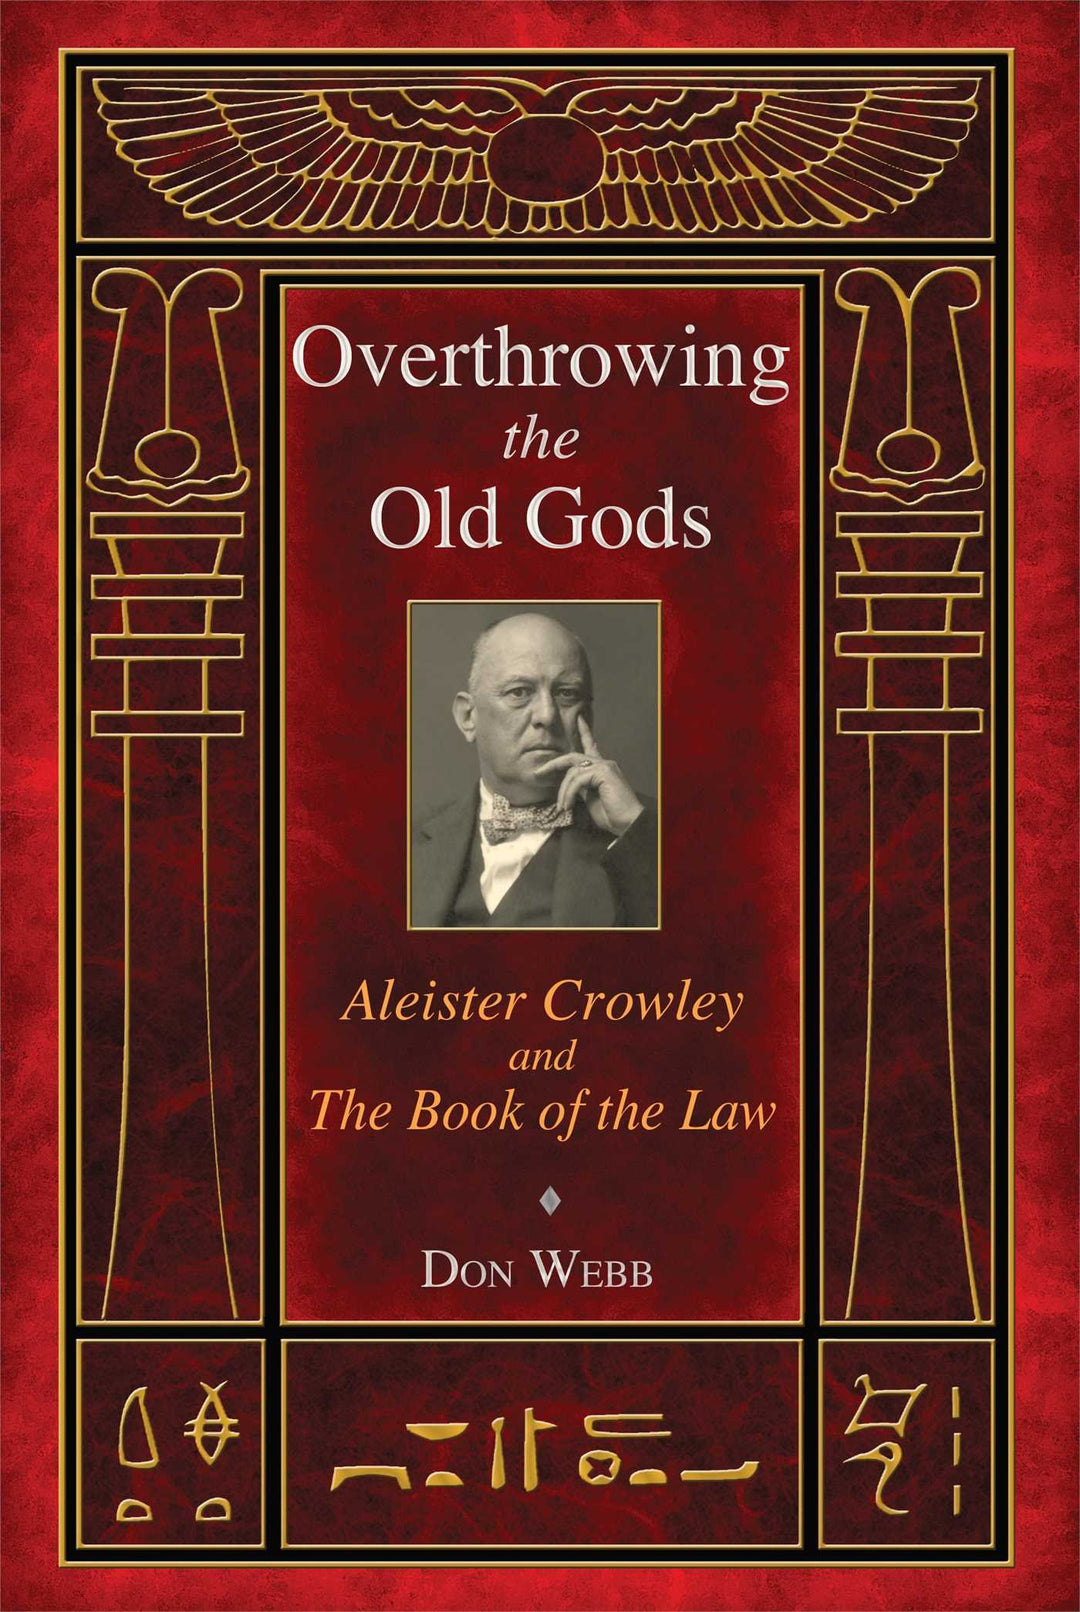 Overthrowing the Old Gods: Aleister Crowley and the Book of the Law by Don Webb